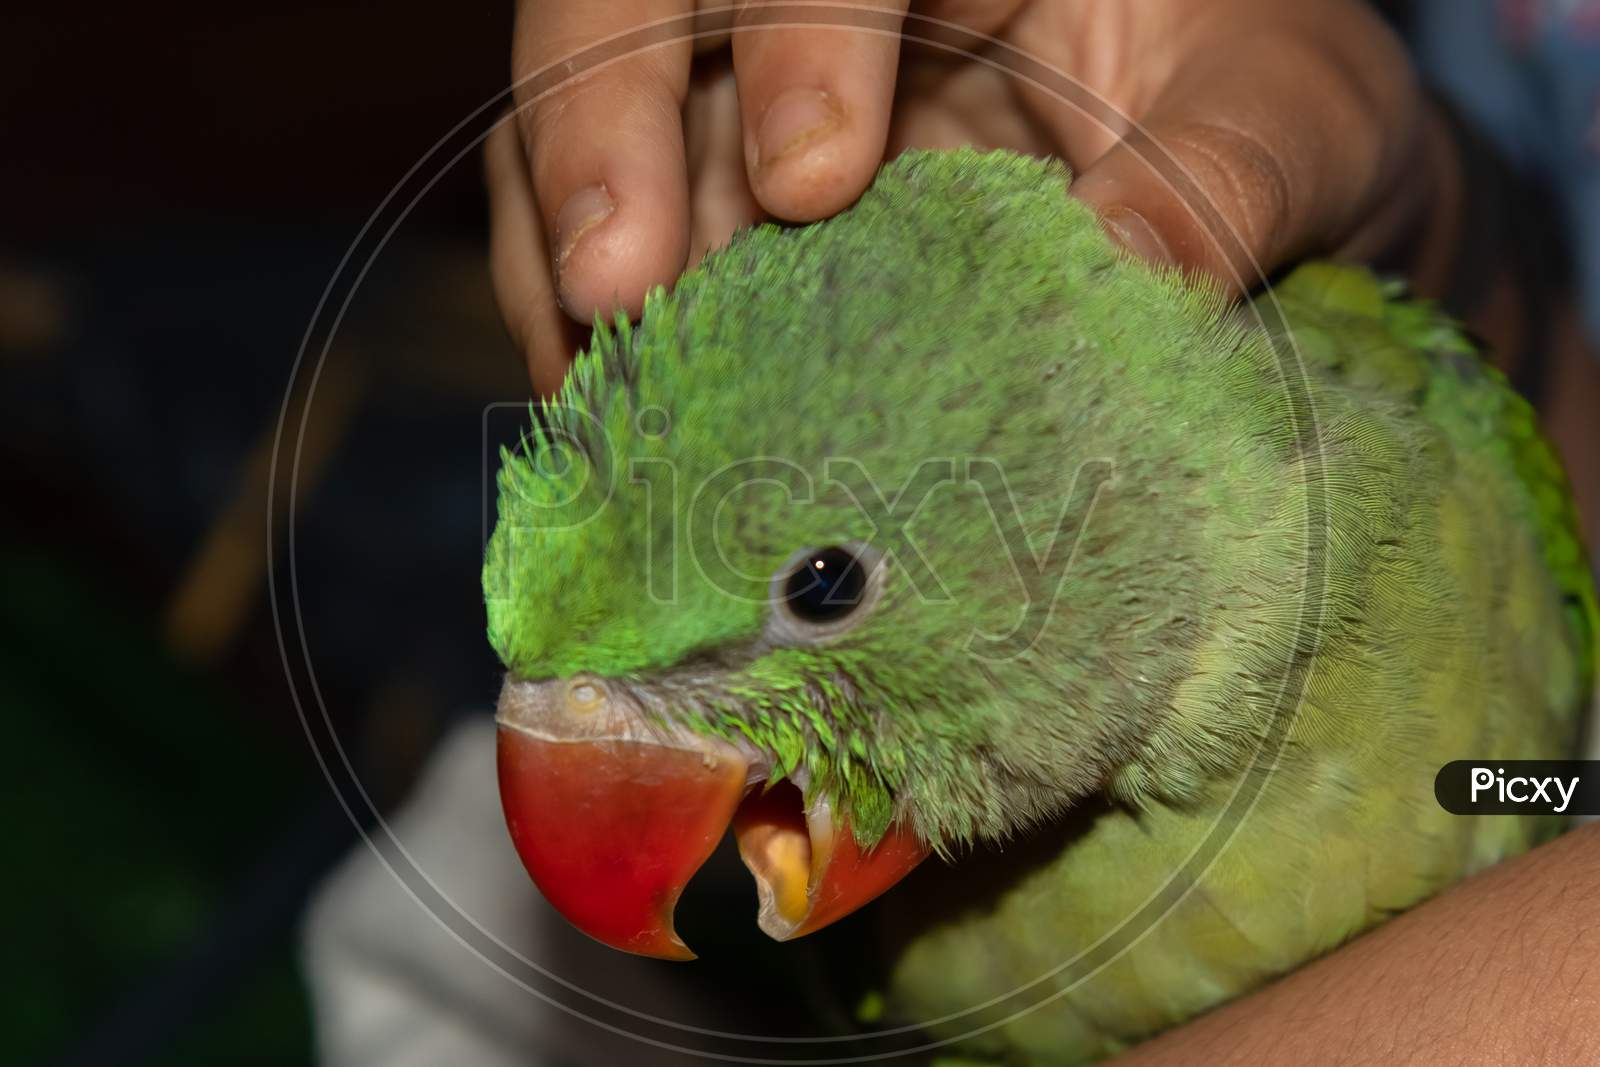 A juvenile parrot with its beak open being comforted in the arms of a human